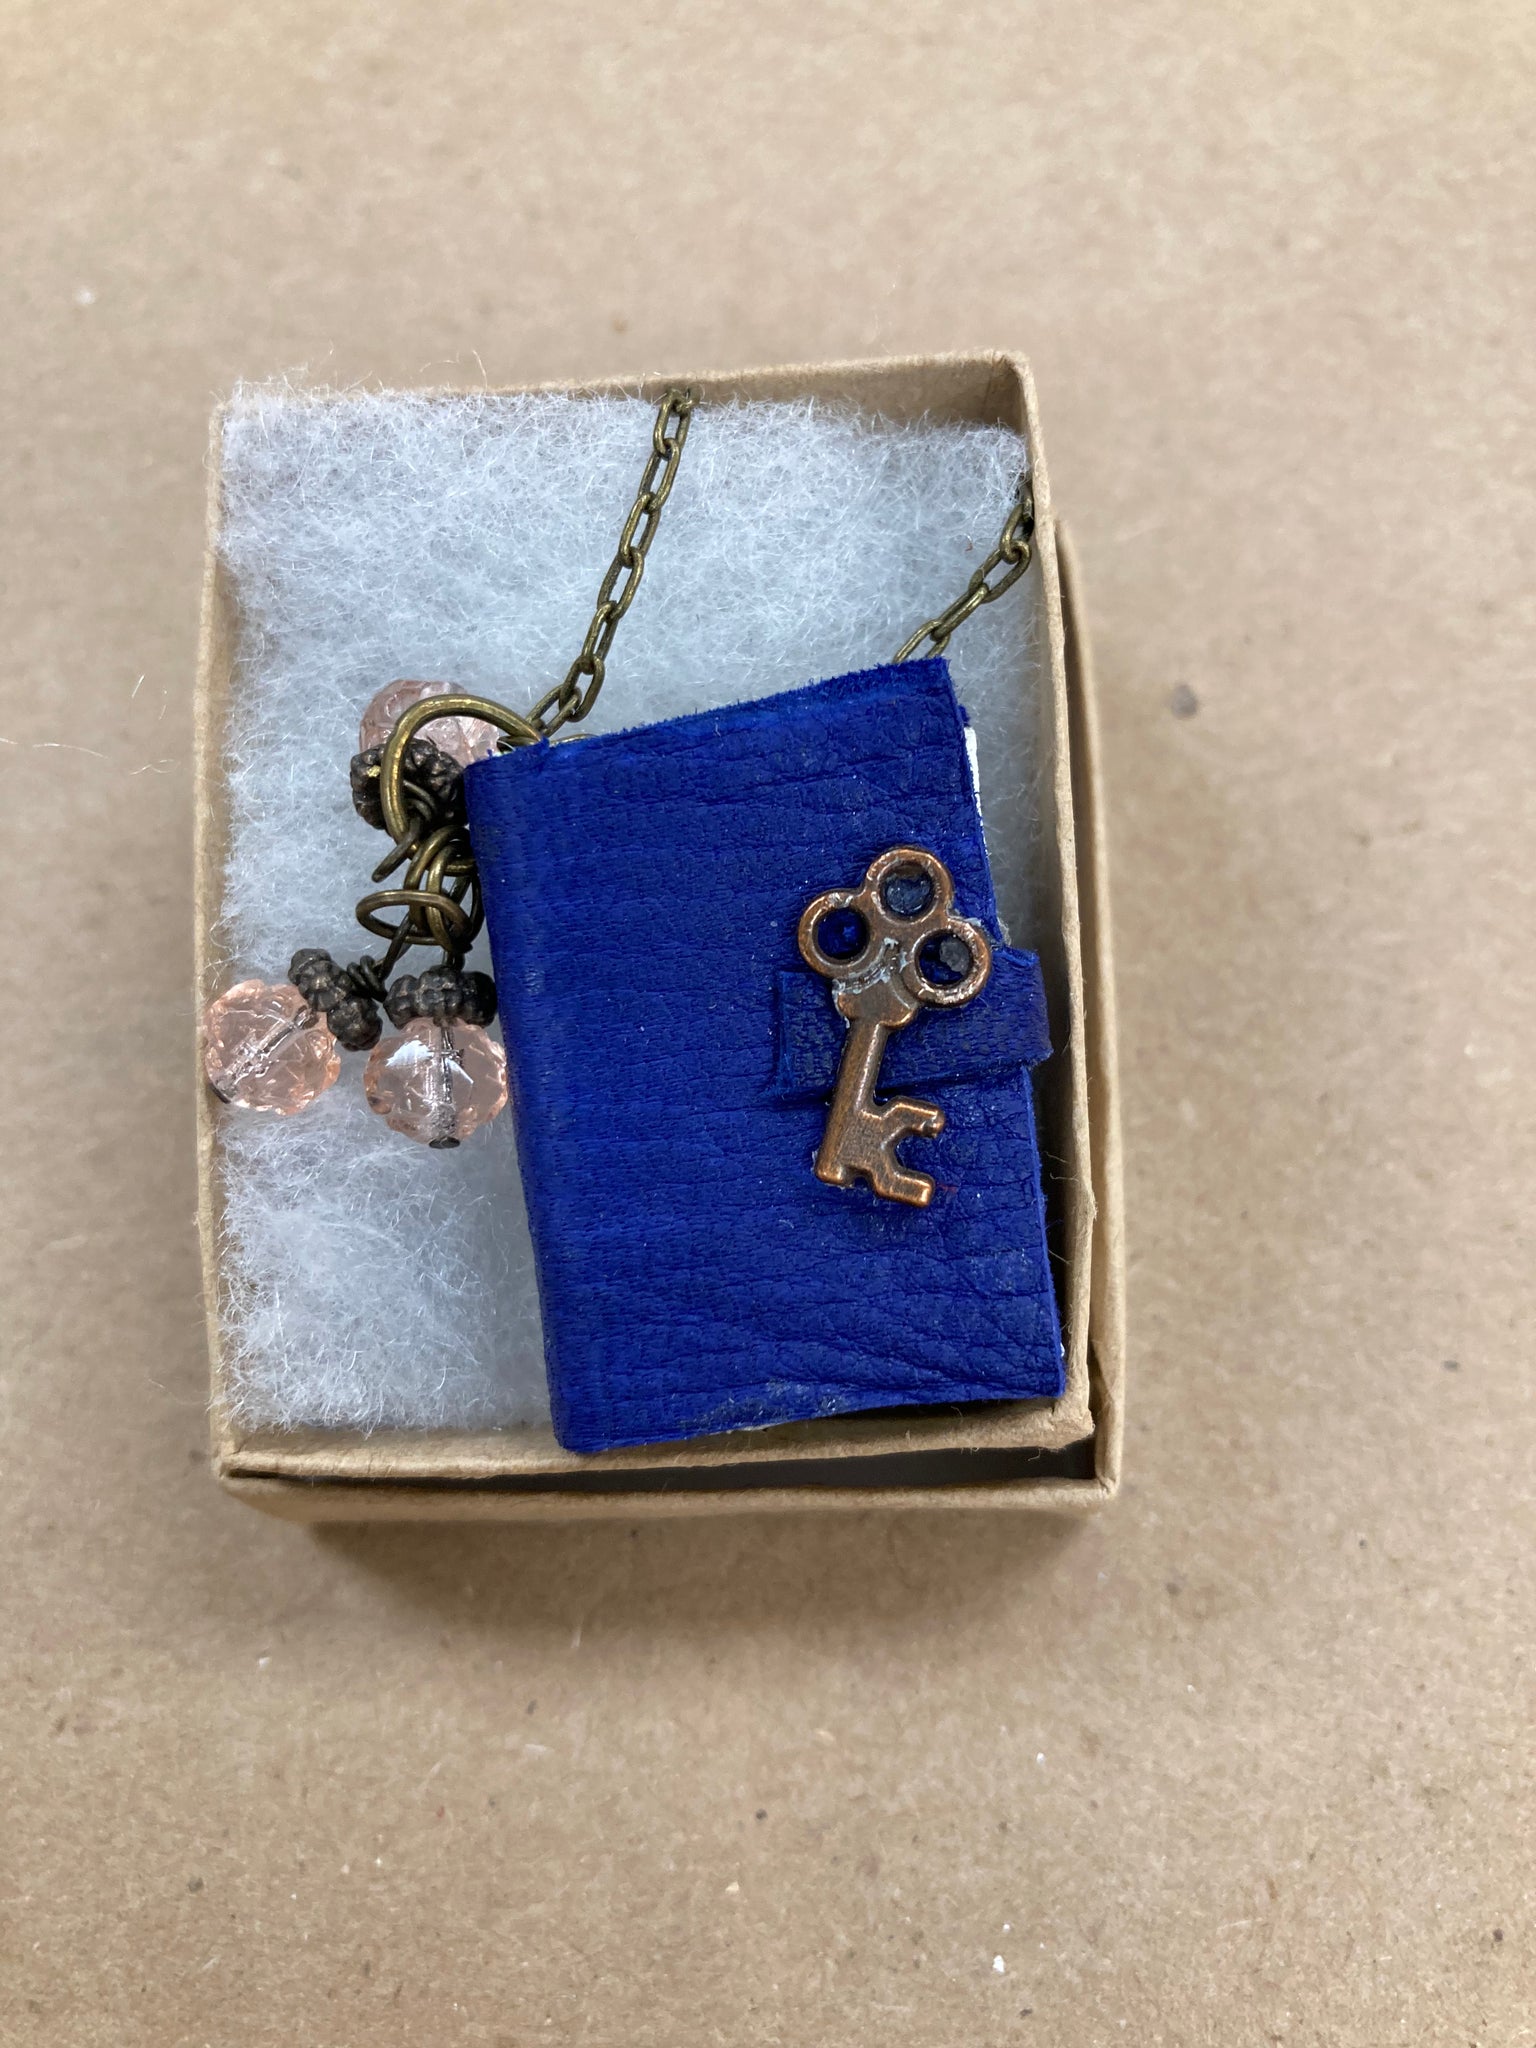 Blue Leather Book W/ Key Charm Necklace